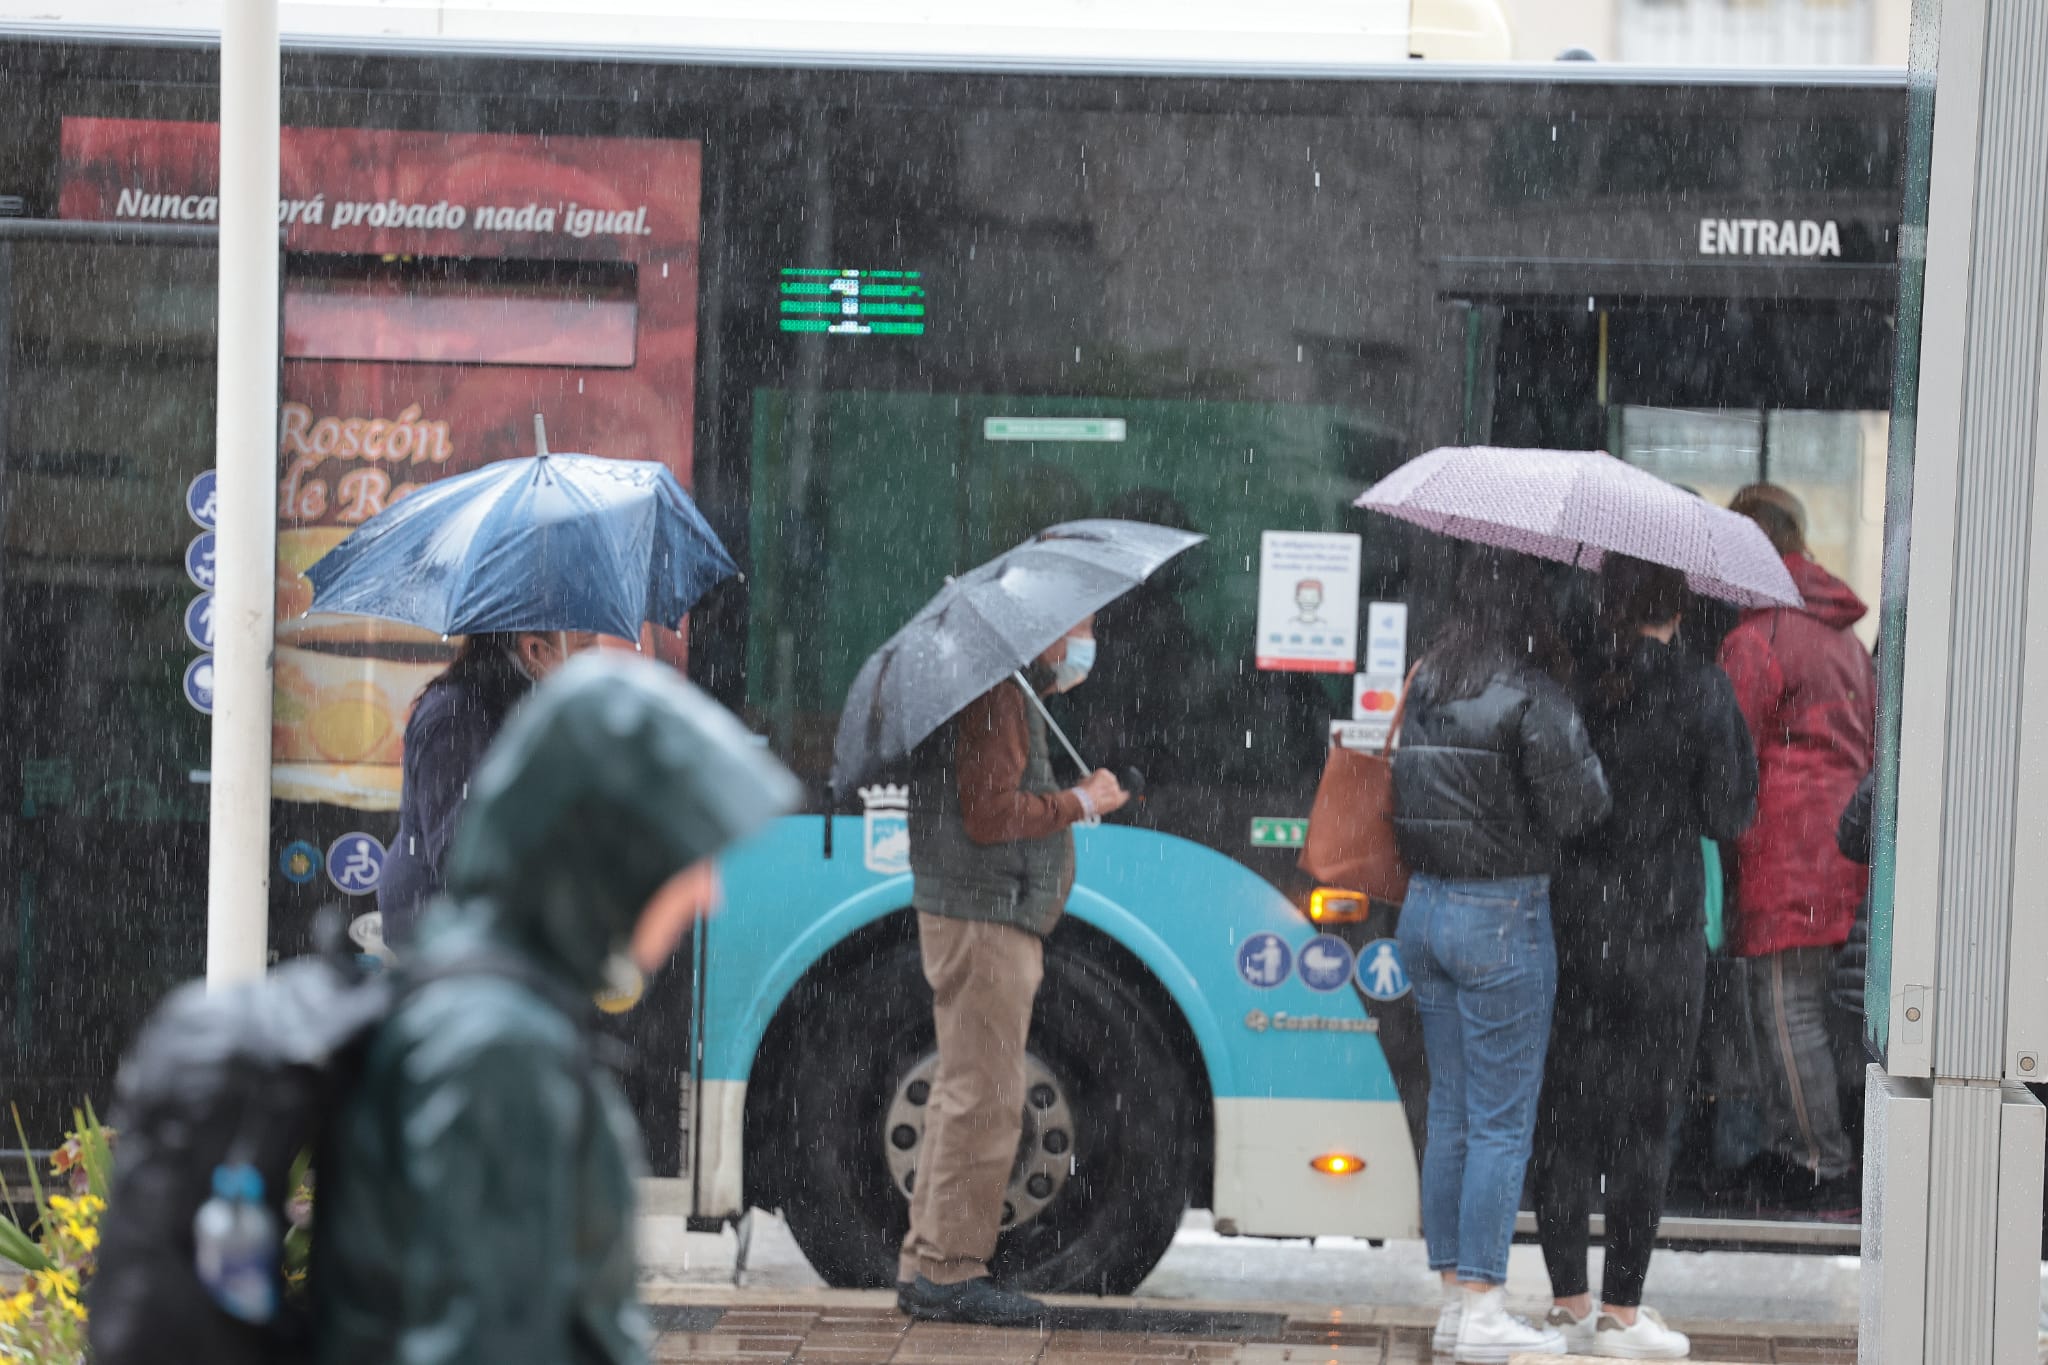 Storm deposits some heavy downpours in Malaga province, and more rain is expected